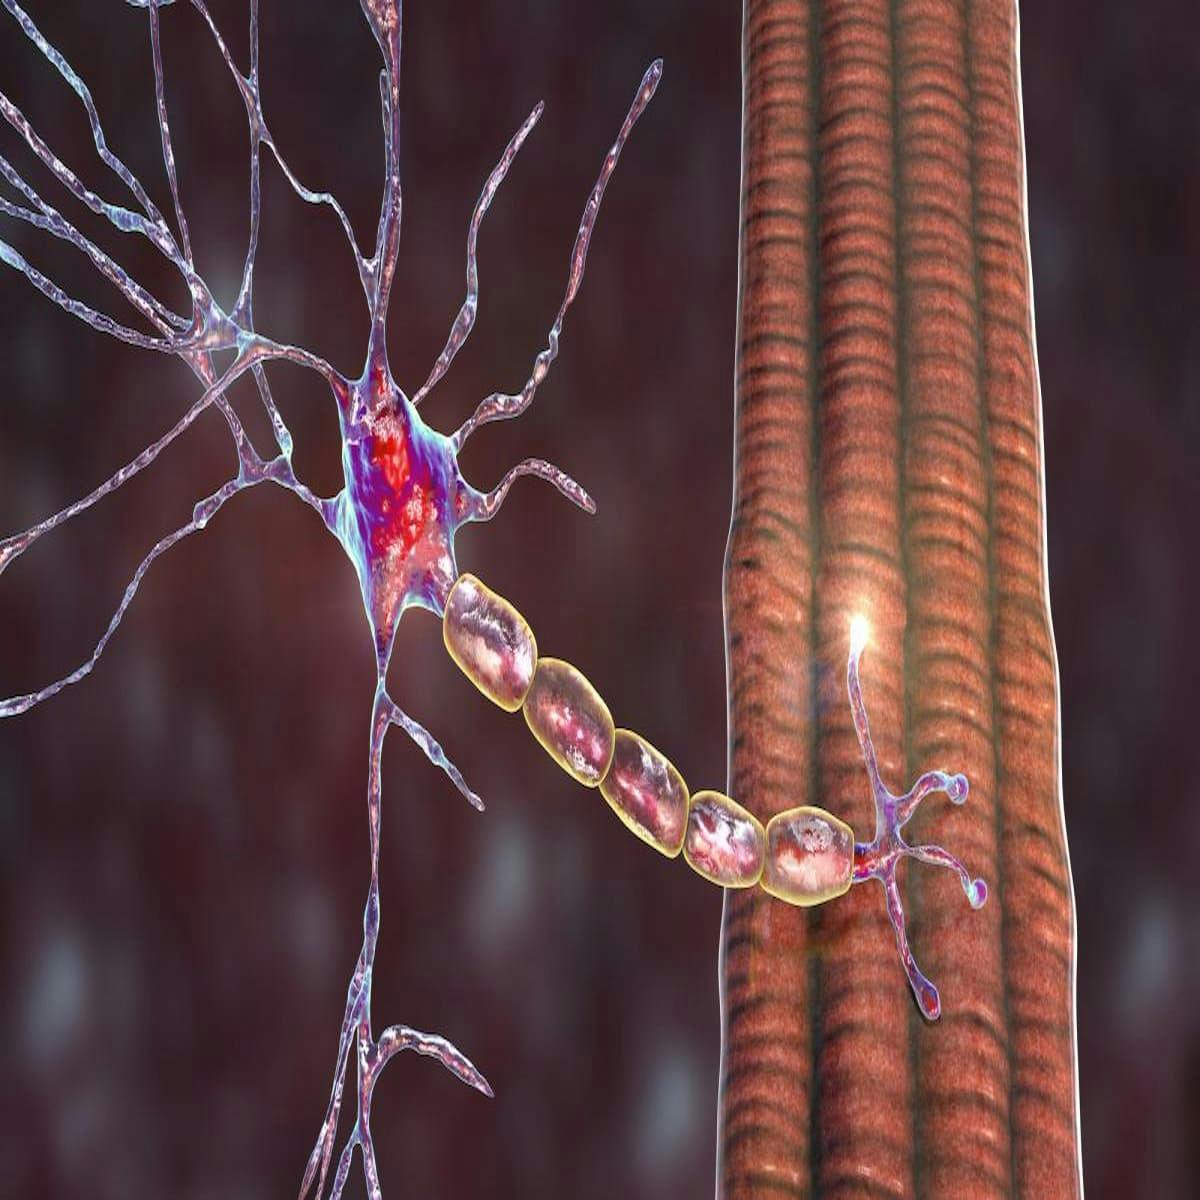 Astrocyte Cell Therapy Temporarily Slows ALS Decline